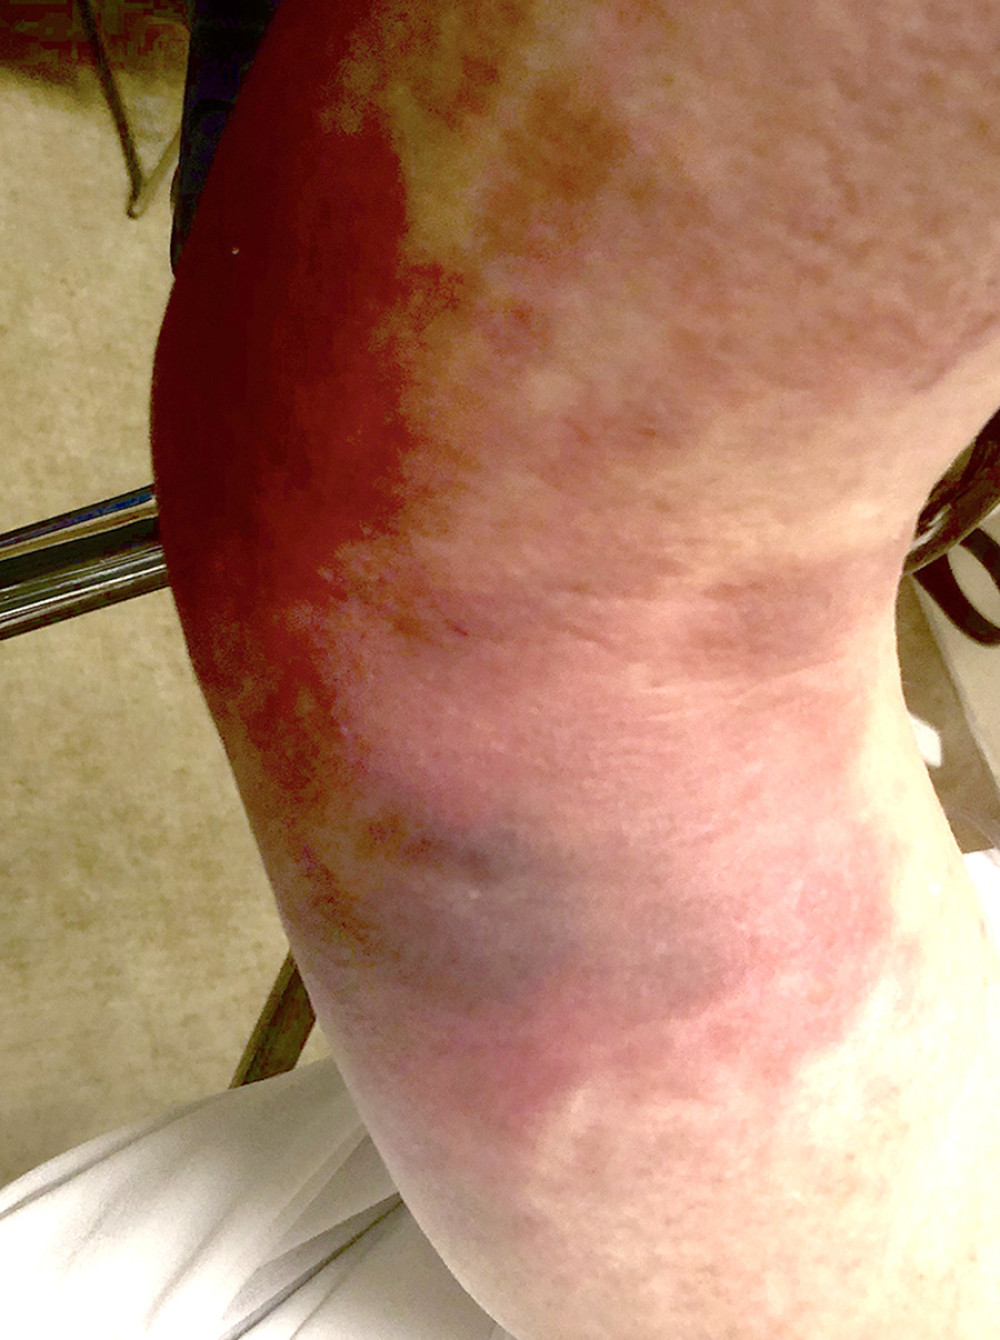 Bedside image of the patient’s right elbow taken in the Emergency Department revealing severe swelling and ecchymosis.